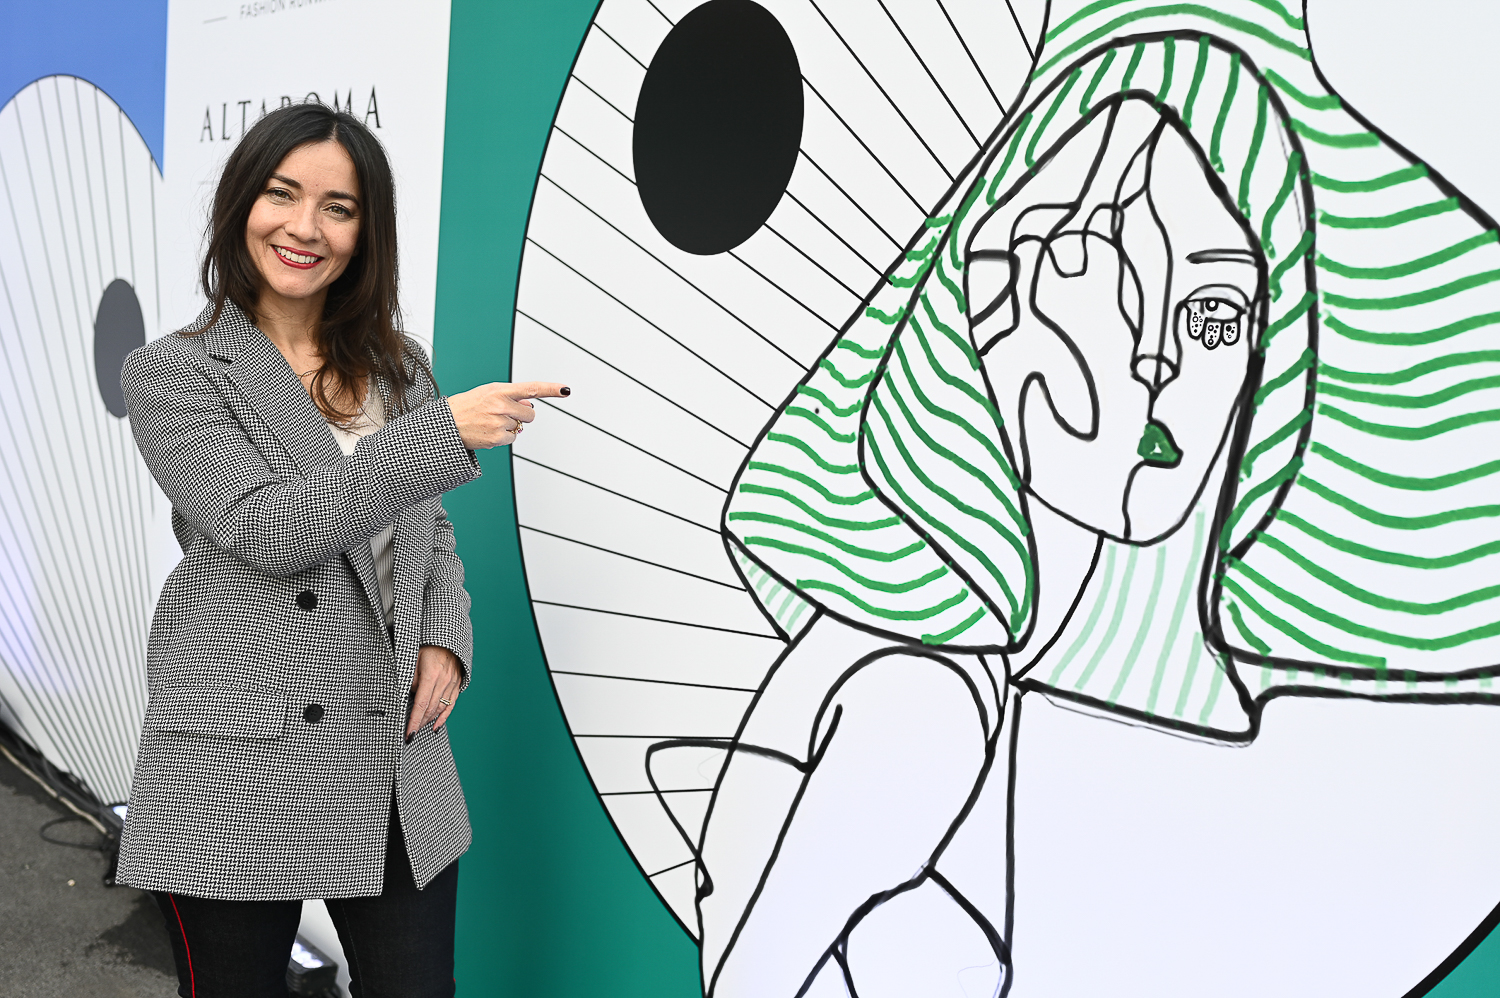 Delphine Souquet in front of the illustration by Gabriele Melodia